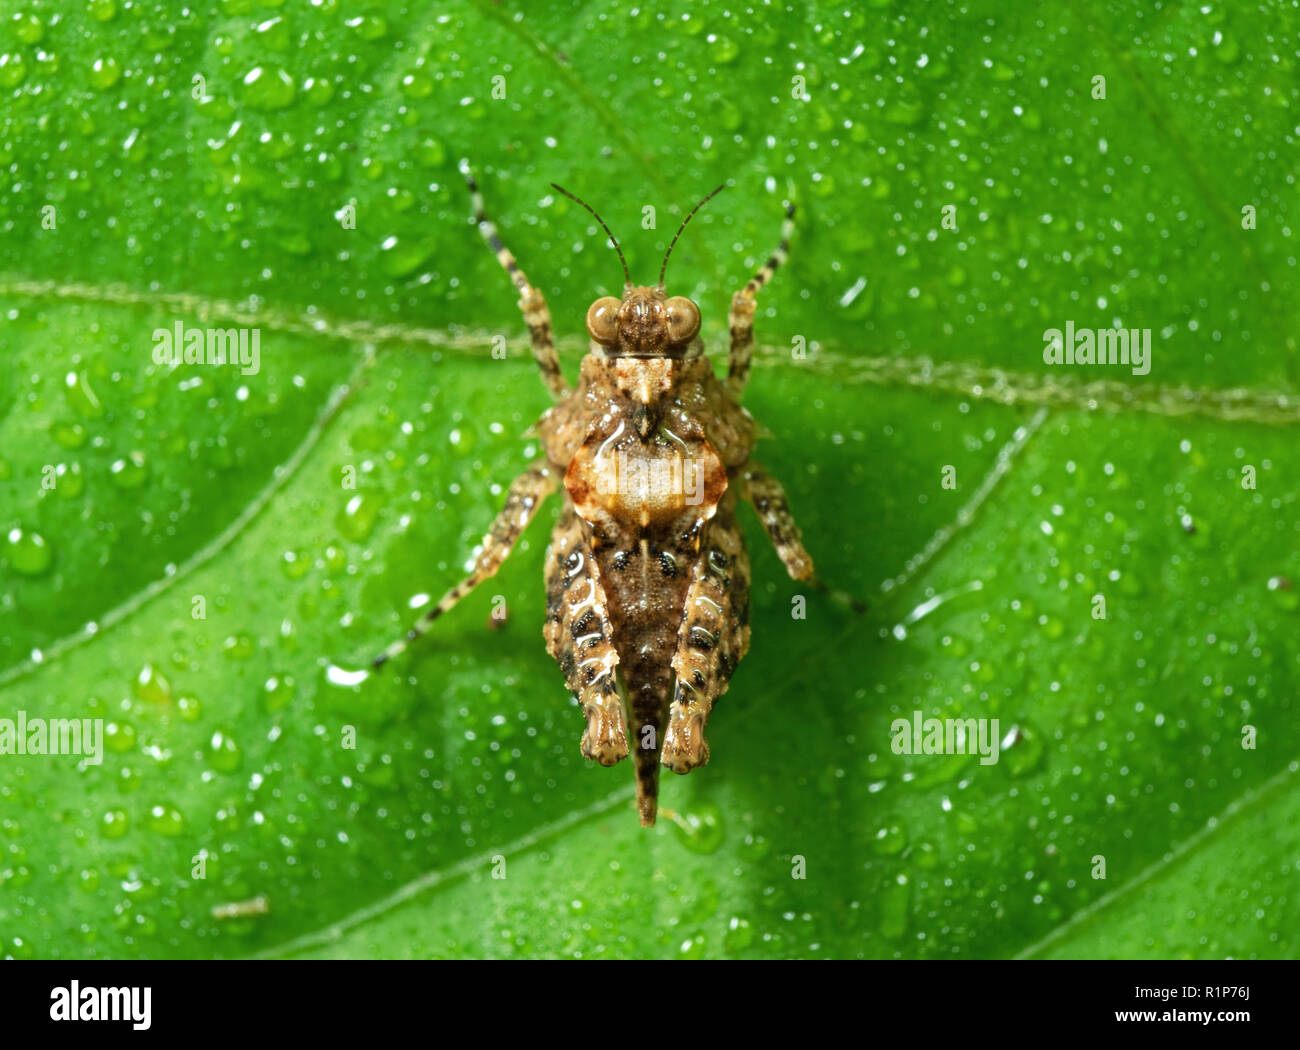 Macro Photography of Spotted Grasshopper on Green Leaf with Dew Stock Photo